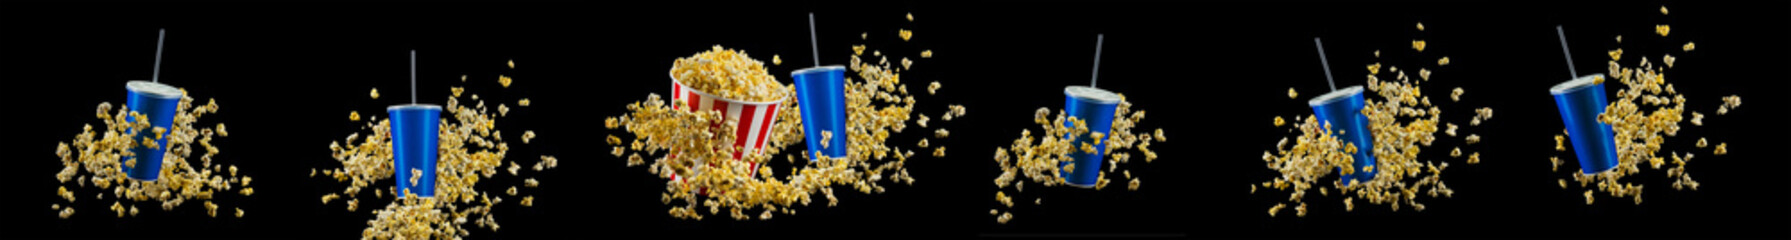 Blue cup with cap and flying popcorn isolated on black background